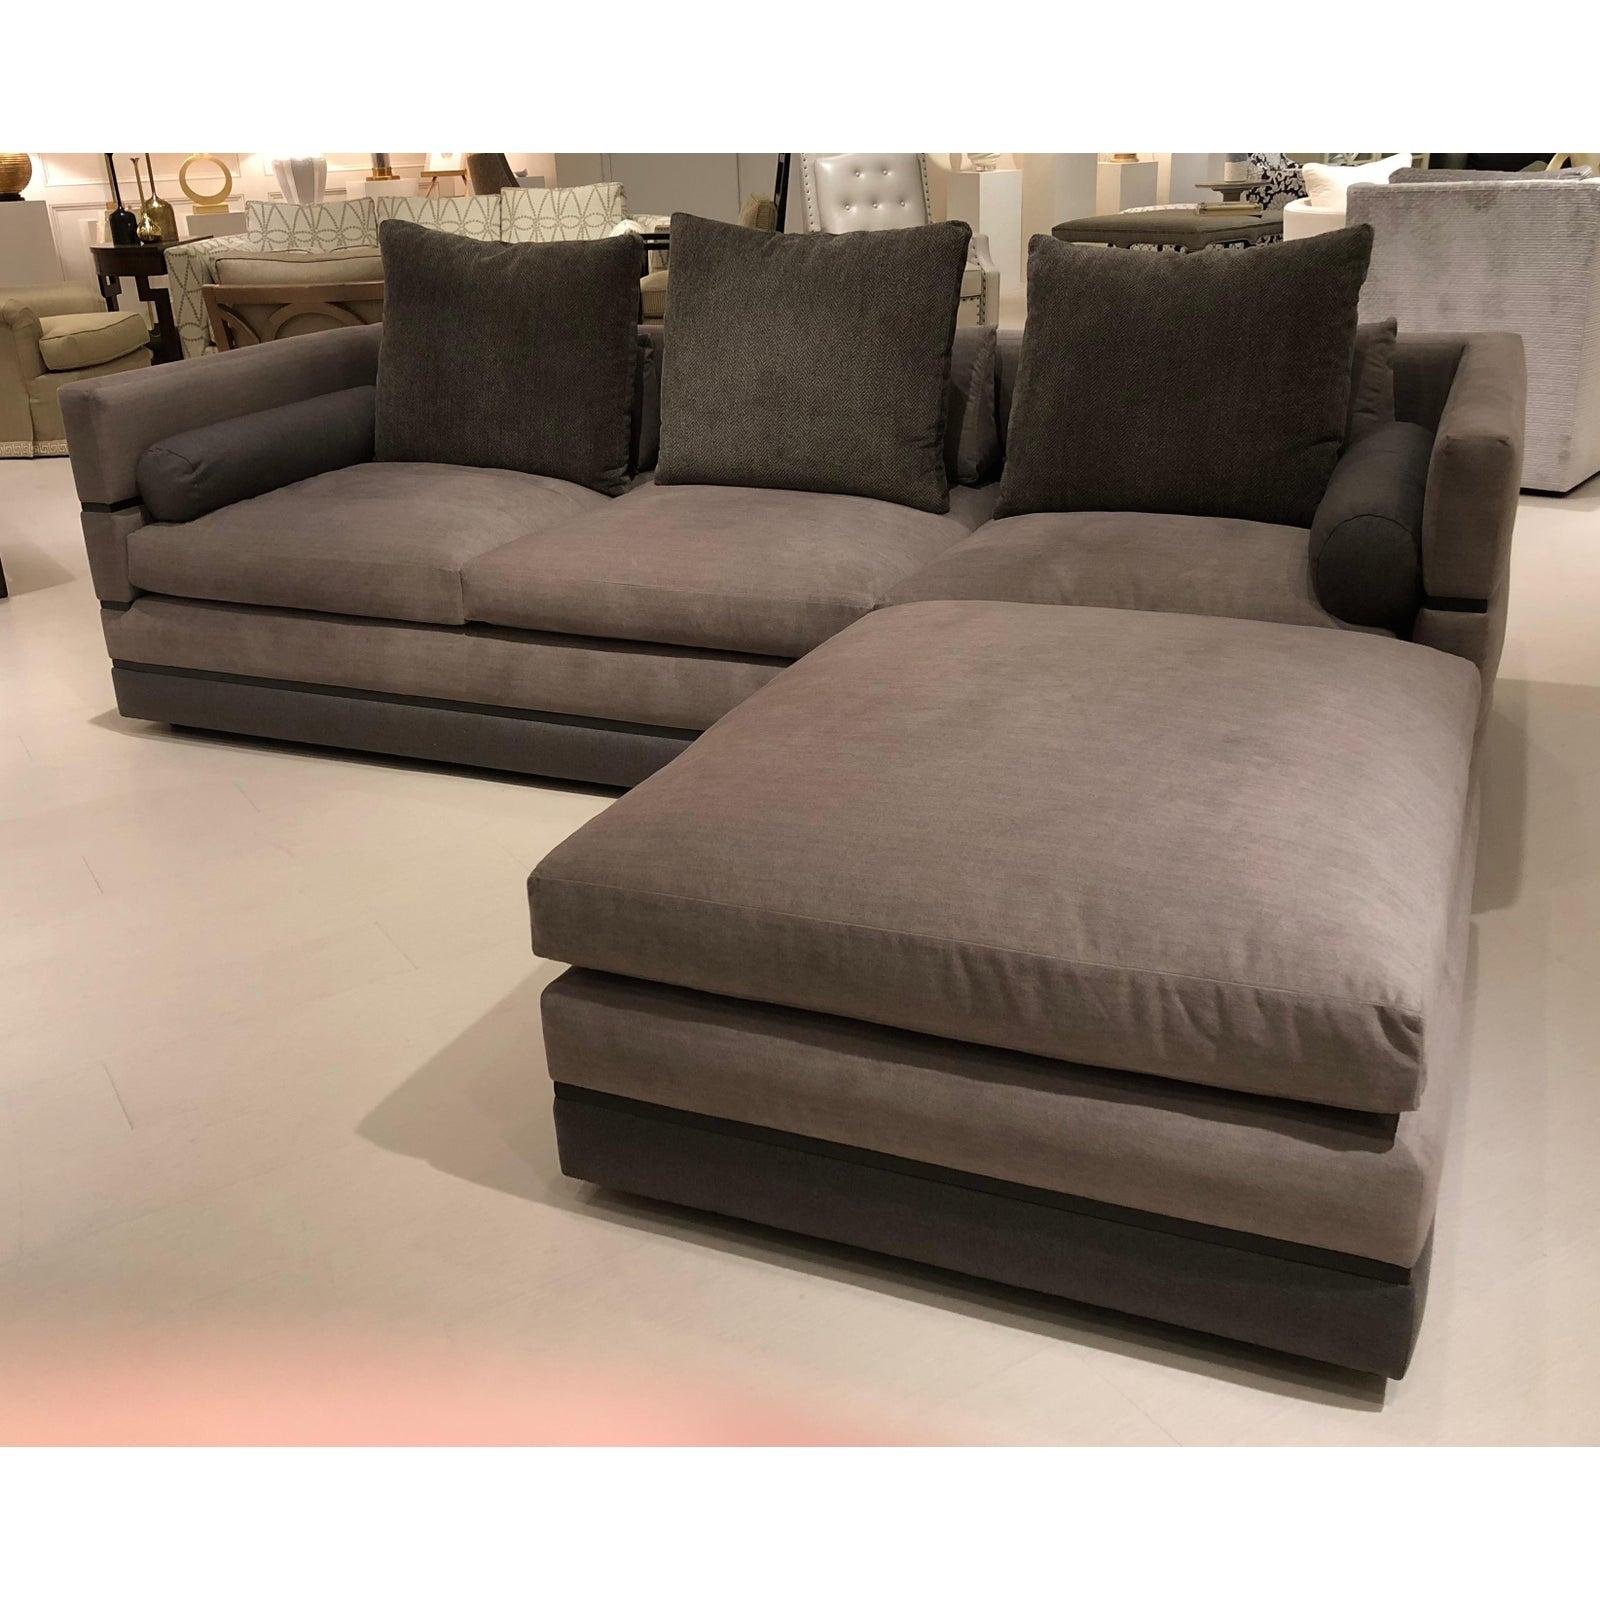 Showroom New. The Nathan Anthony Evok Sofa is a striking Euro-inspired Modular Design with Ample Seating, Playful Cushioning and Accent Pillow Arrangements. Its Sheltered Upholstery Zones are Separated by Stunning Wood Detail. Evoke Floats